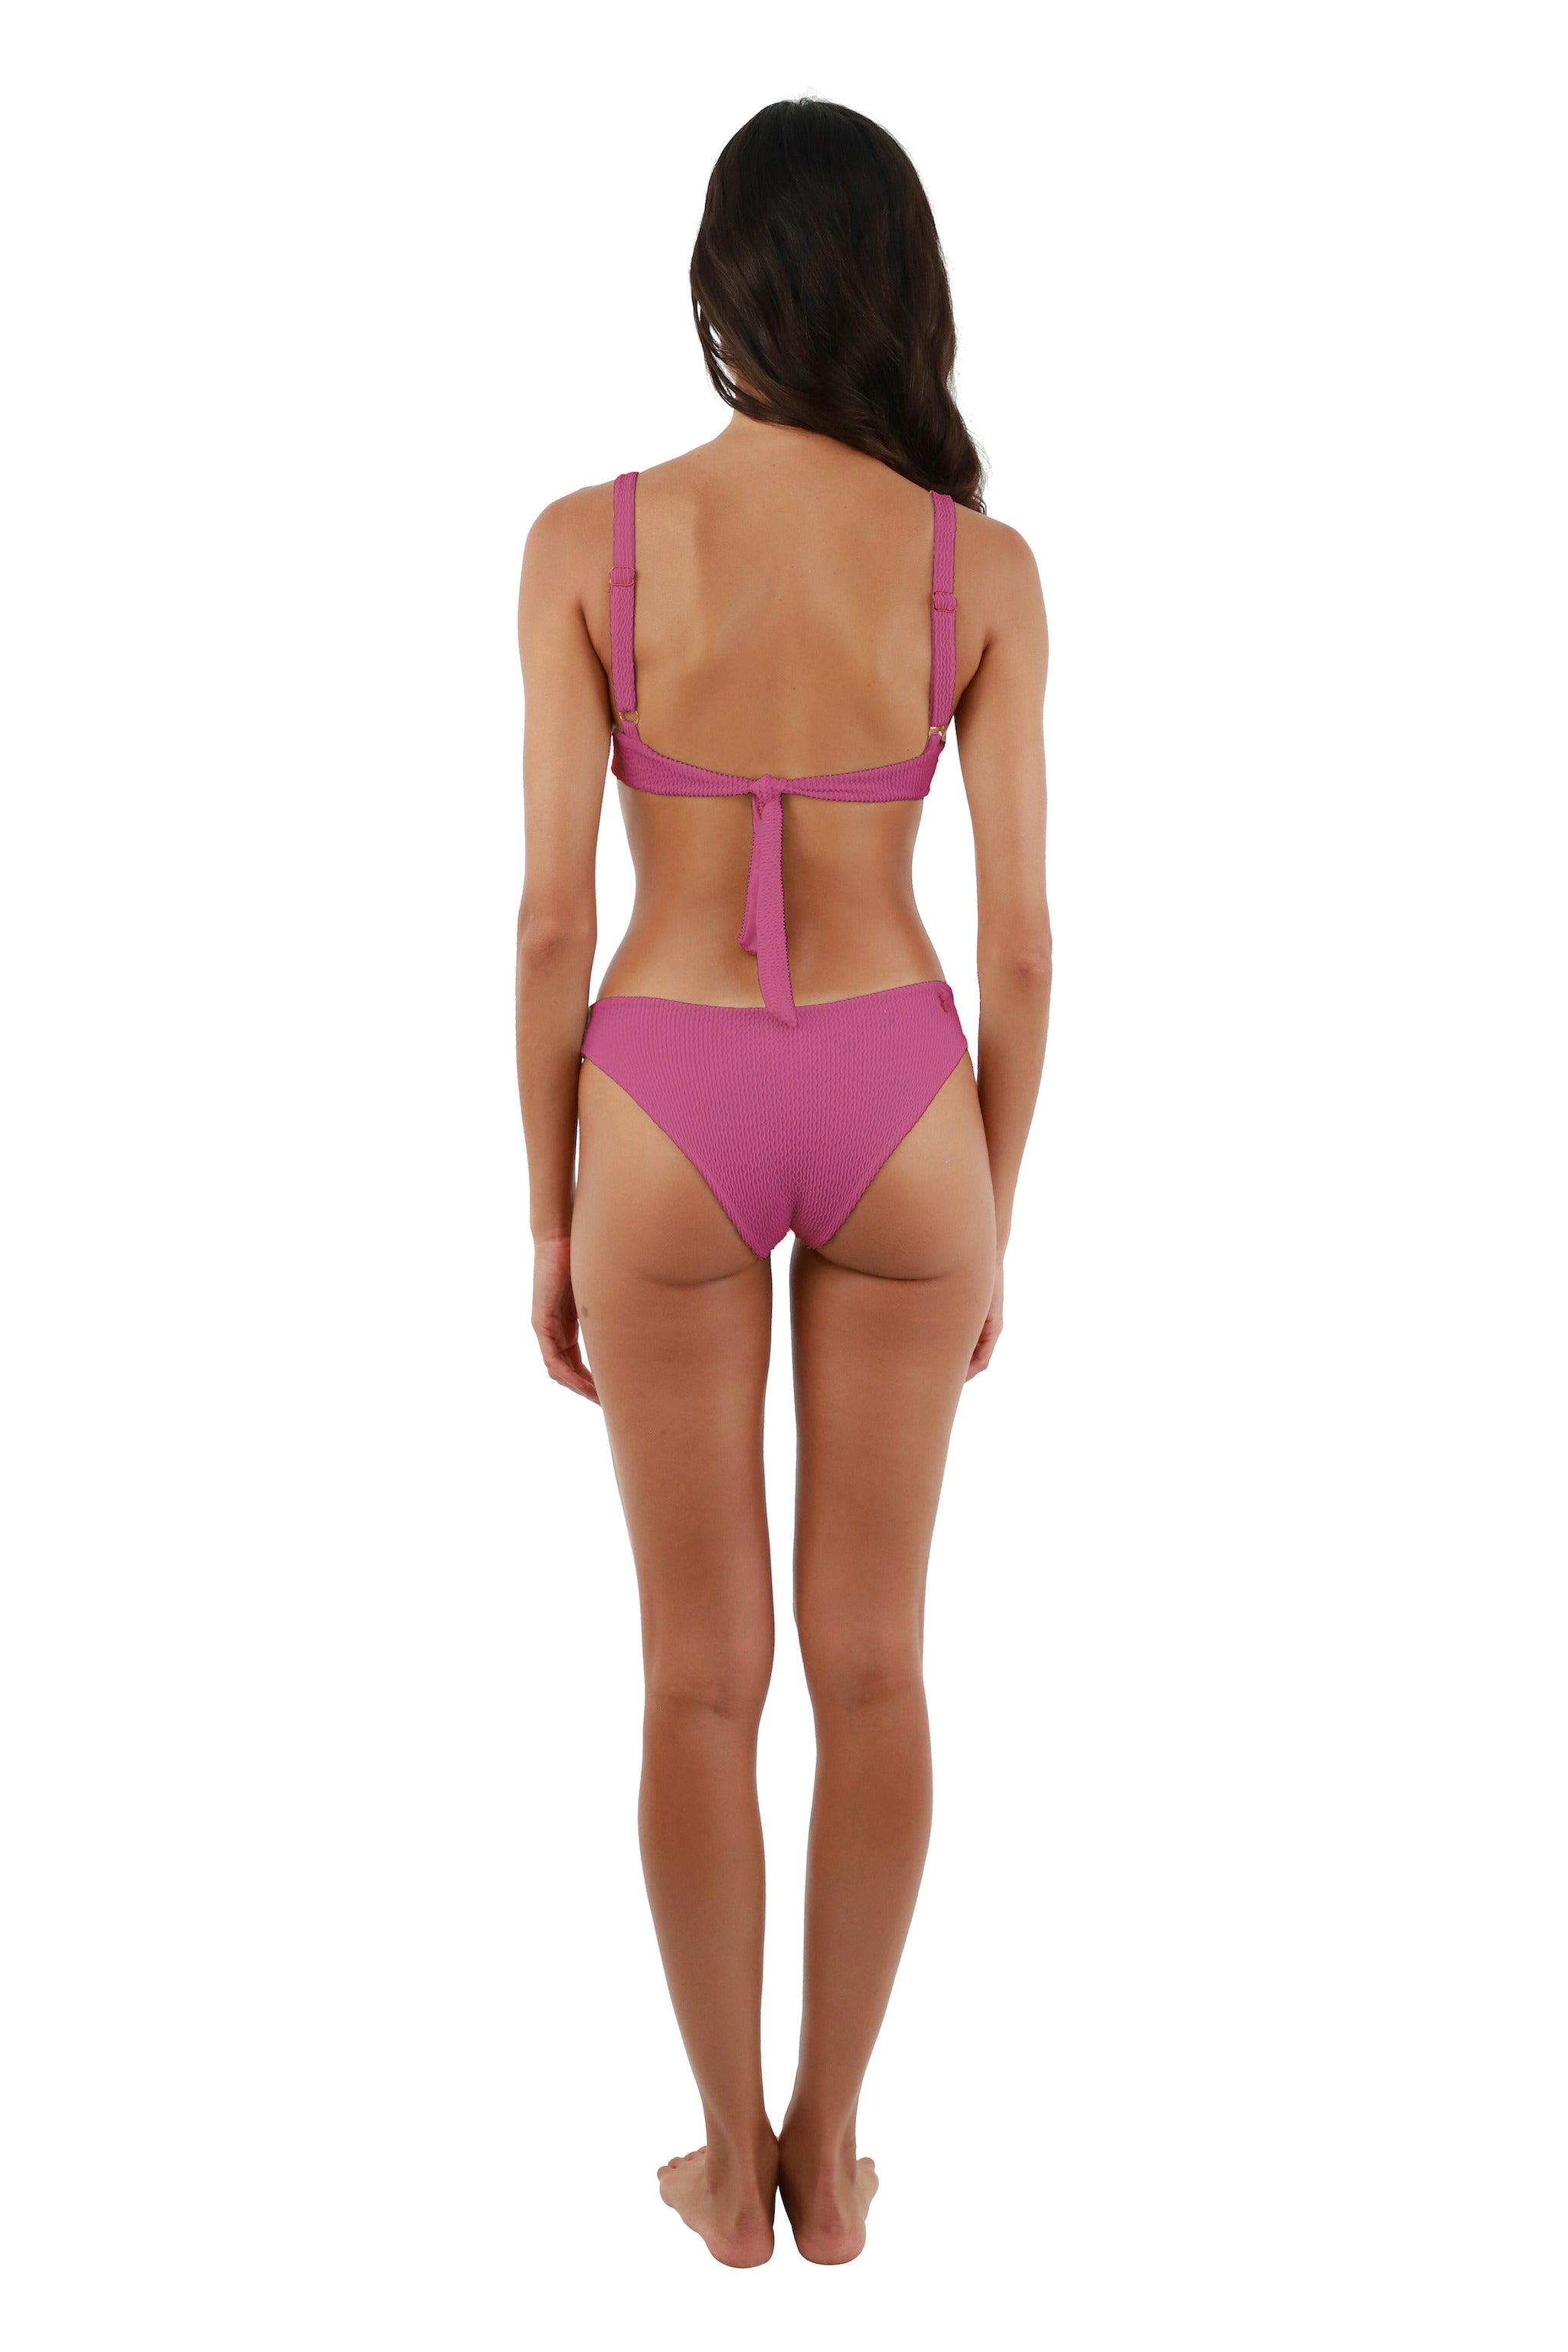 Textured Wave Easy Pink Neo Paramount Bottom